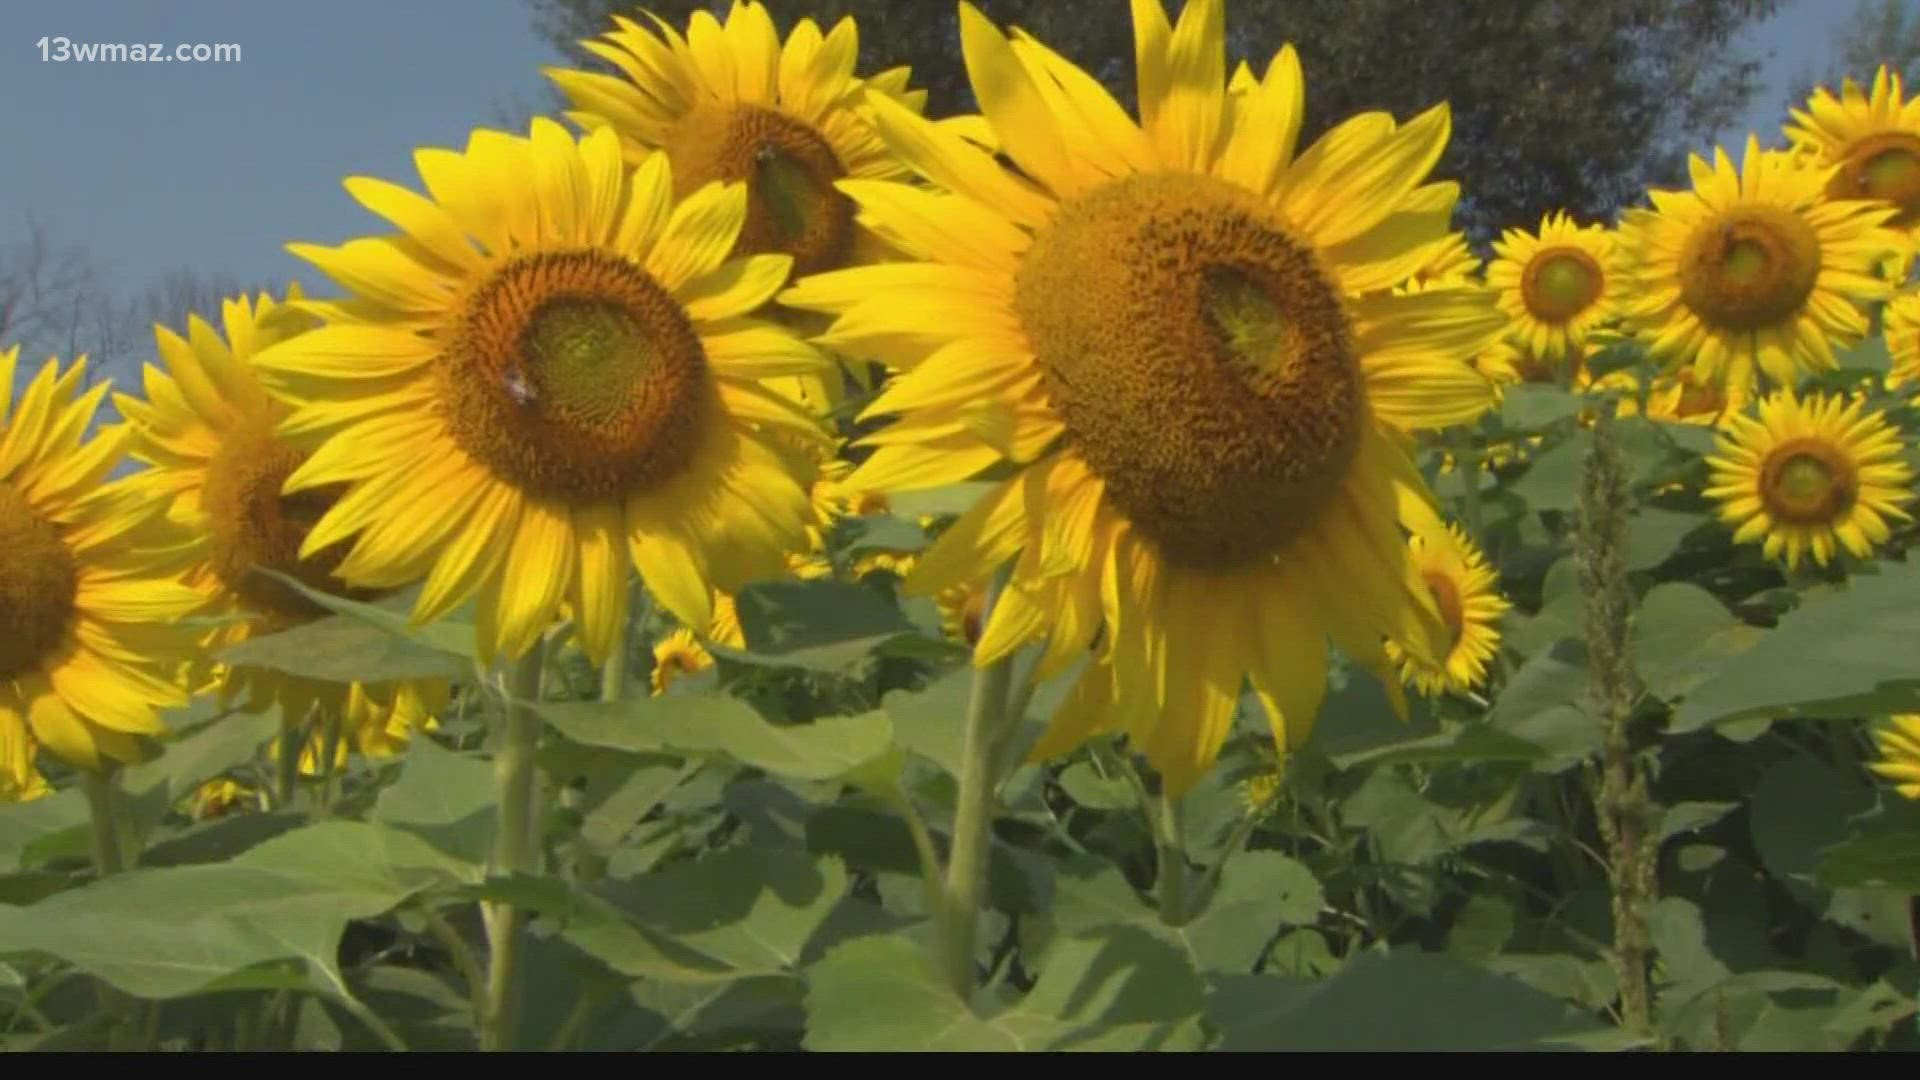 Sunflowers are in full bloom now, but they go through a unique journey to get there.